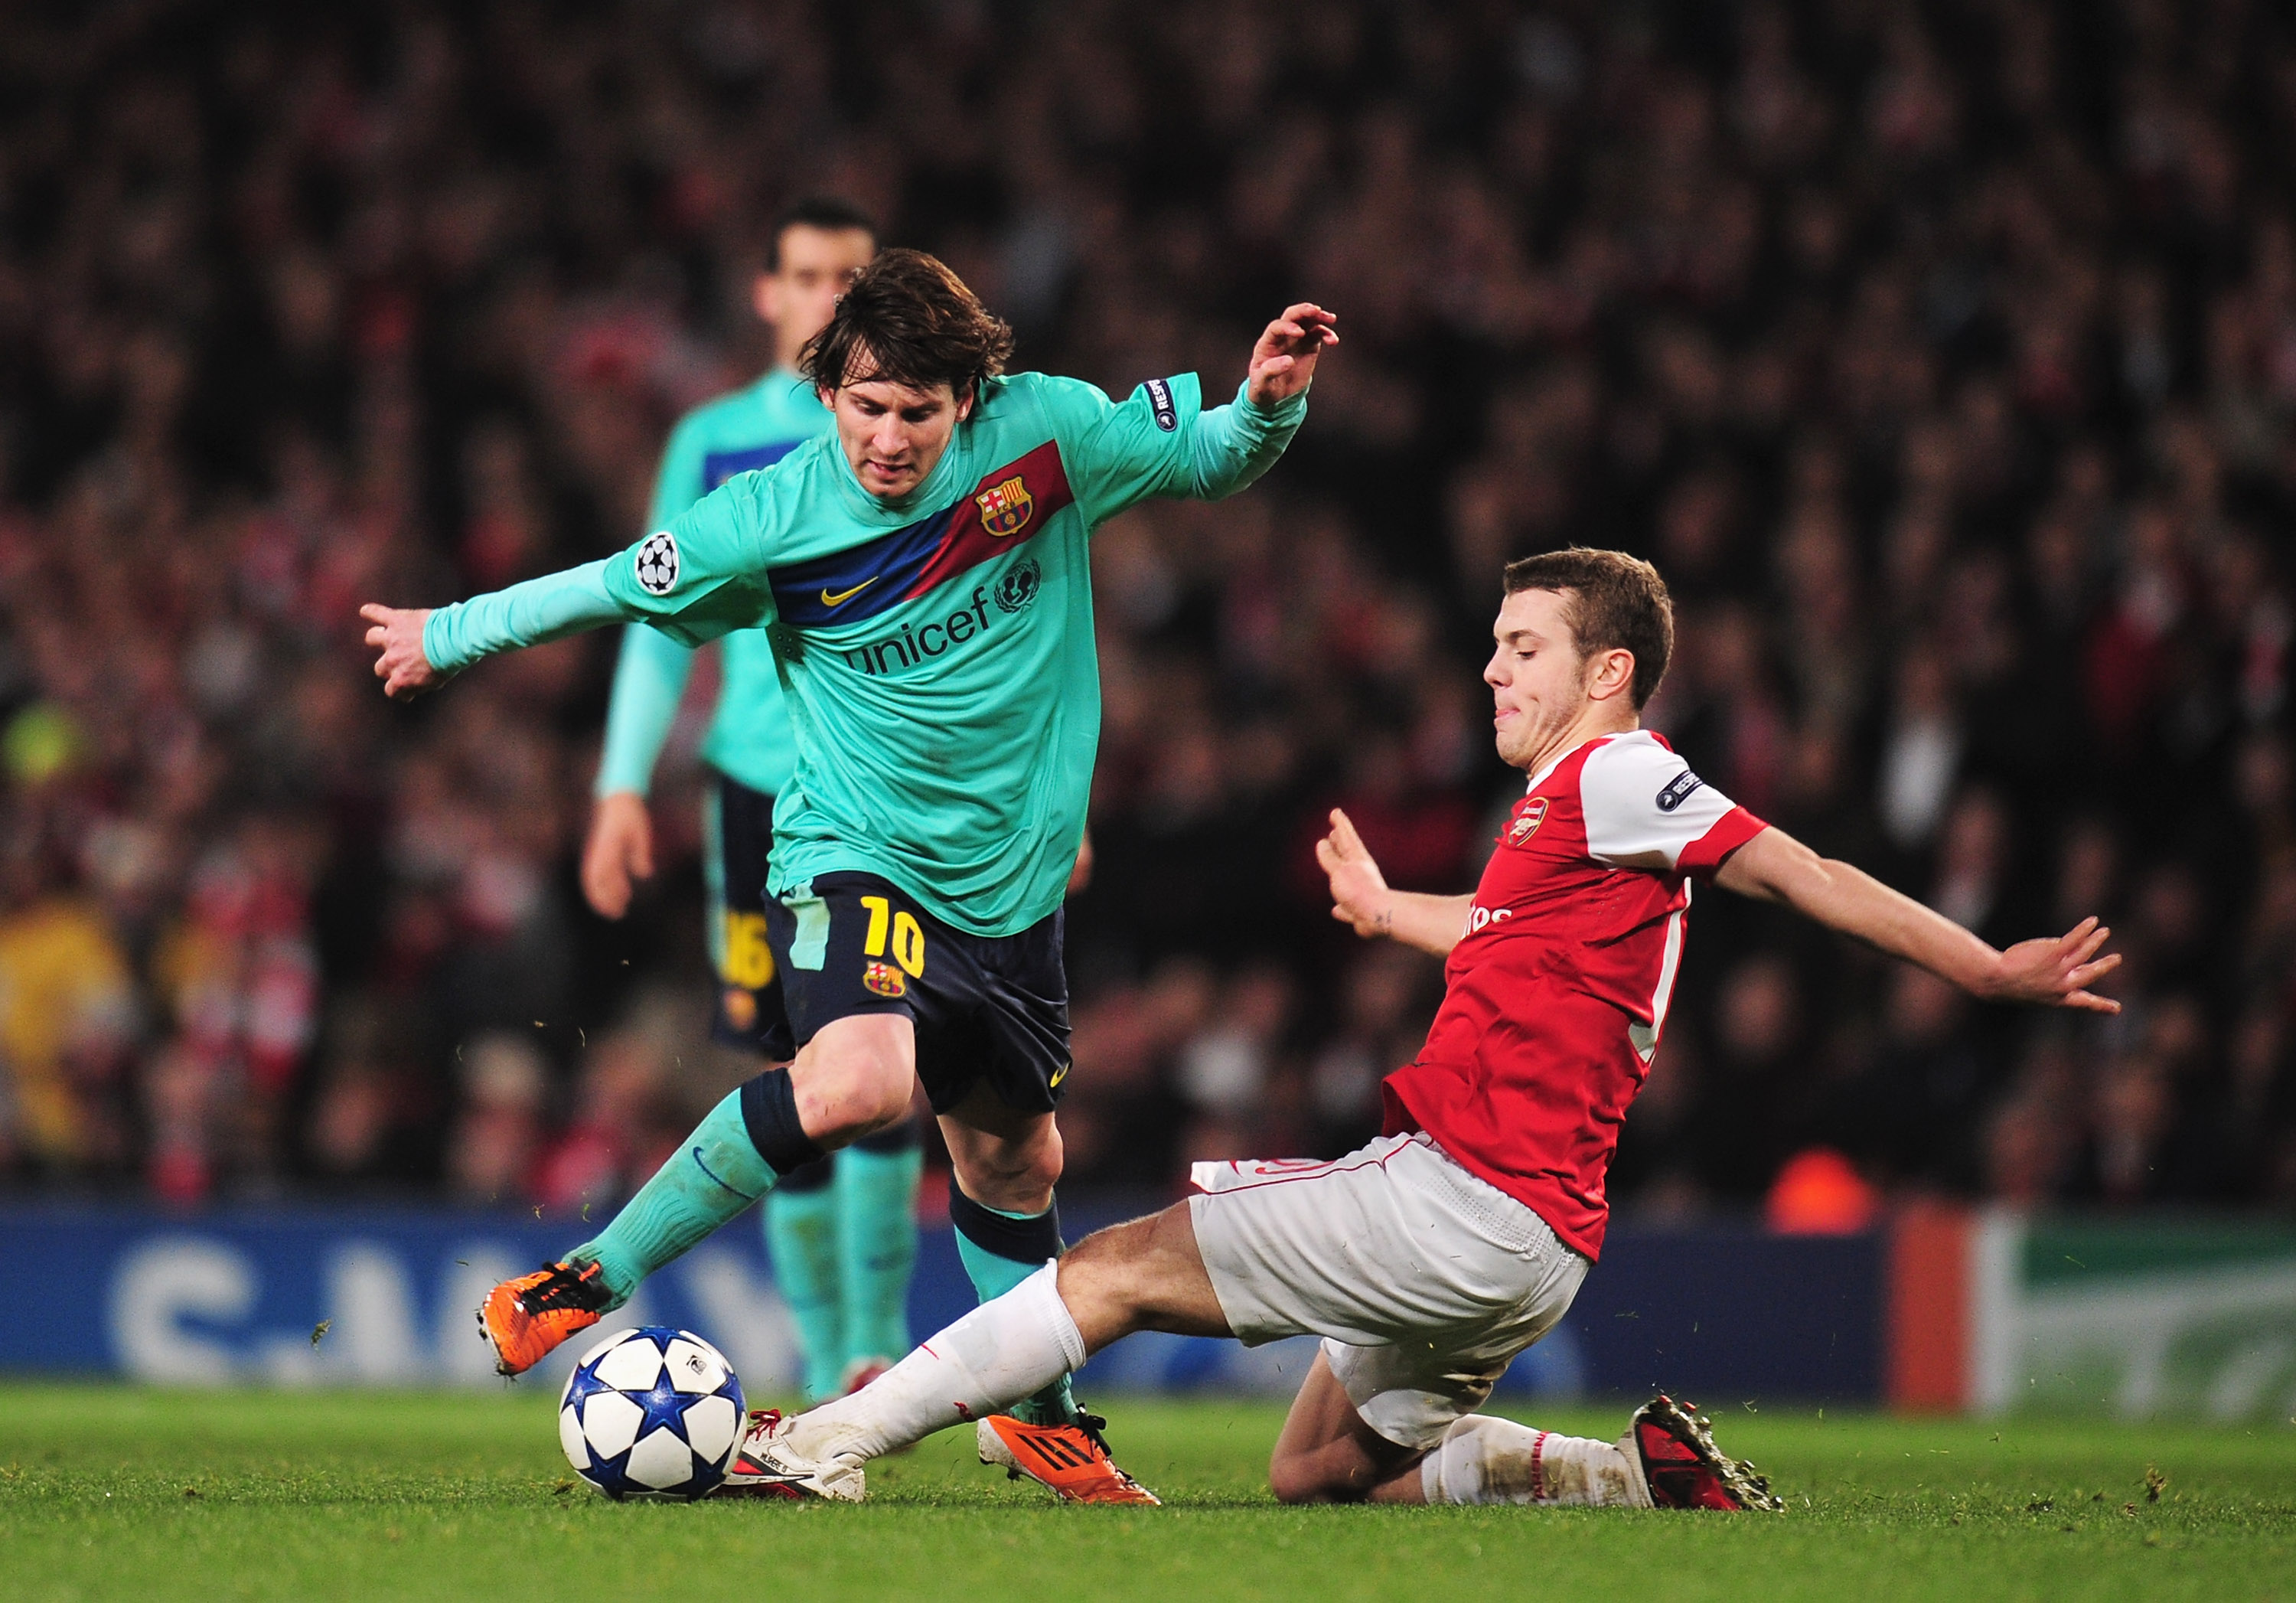 LONDON, ENGLAND - FEBRUARY 16: Lionel Messi of Barcelona is challenged by  Jack Wilshere of Arsenal   during the UEFA Champions League round of 16 first leg match between Arsenal and Barcelona at the Emirates Stadium on February 16, 2011 in London, Englan